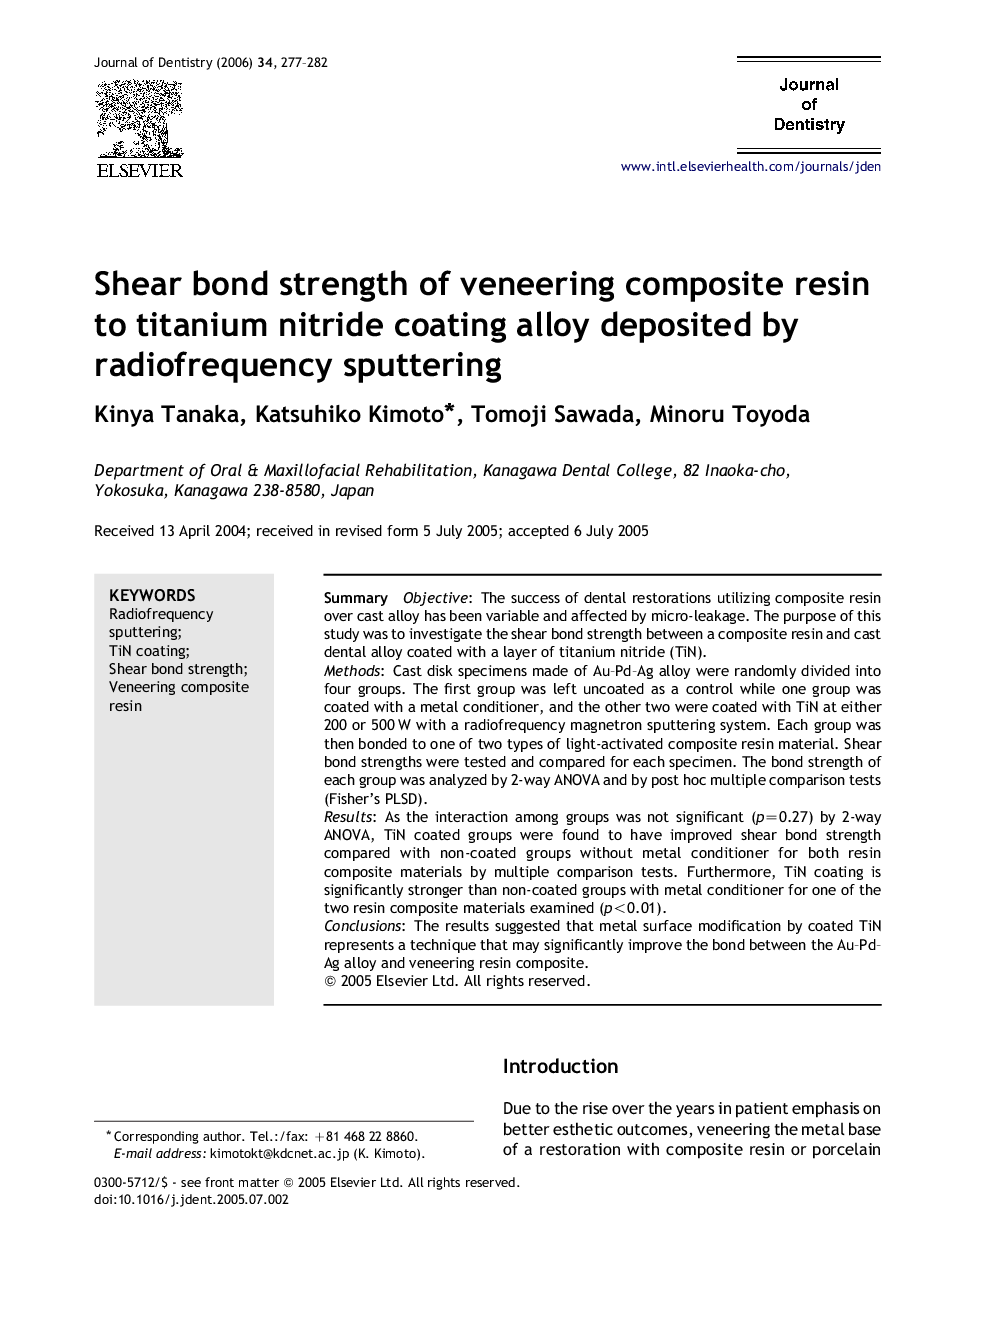 Shear bond strength of veneering composite resin to titanium nitride coating alloy deposited by radiofrequency sputtering